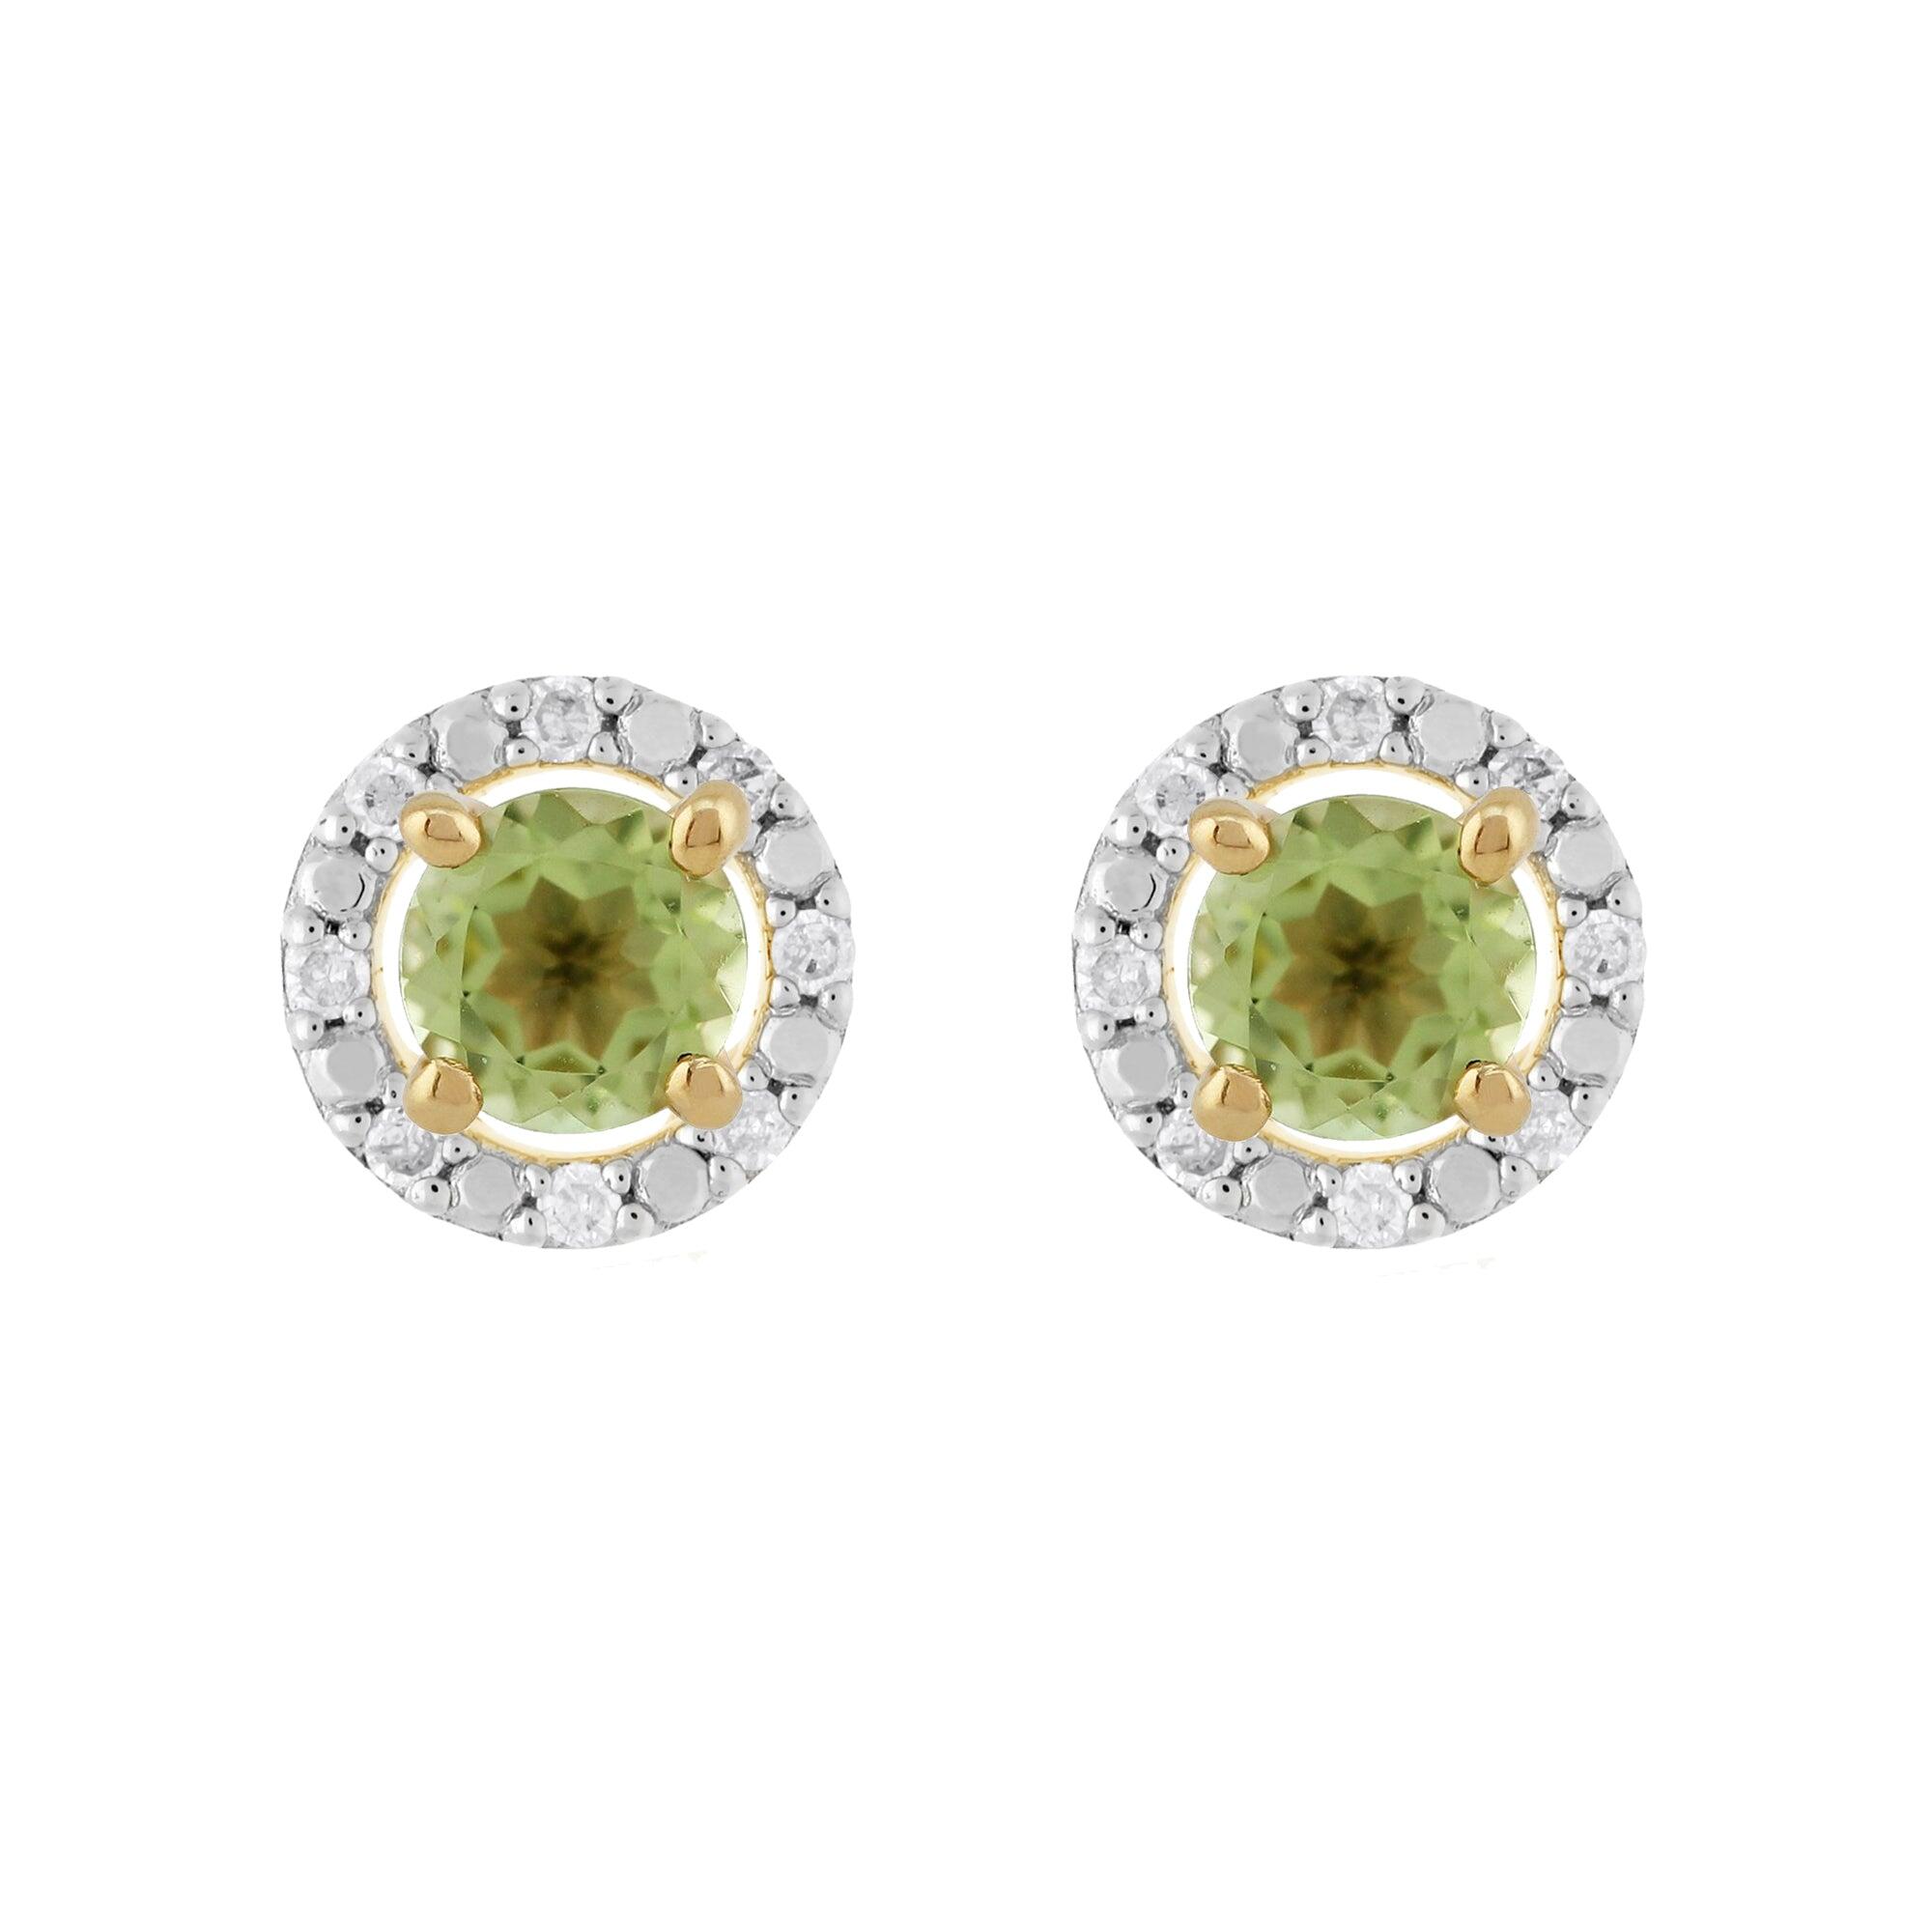 Classic Round Peridot Stud Earrings with Detachable Diamond Round Earrings Jacket Set in 9ct Yellow Gold